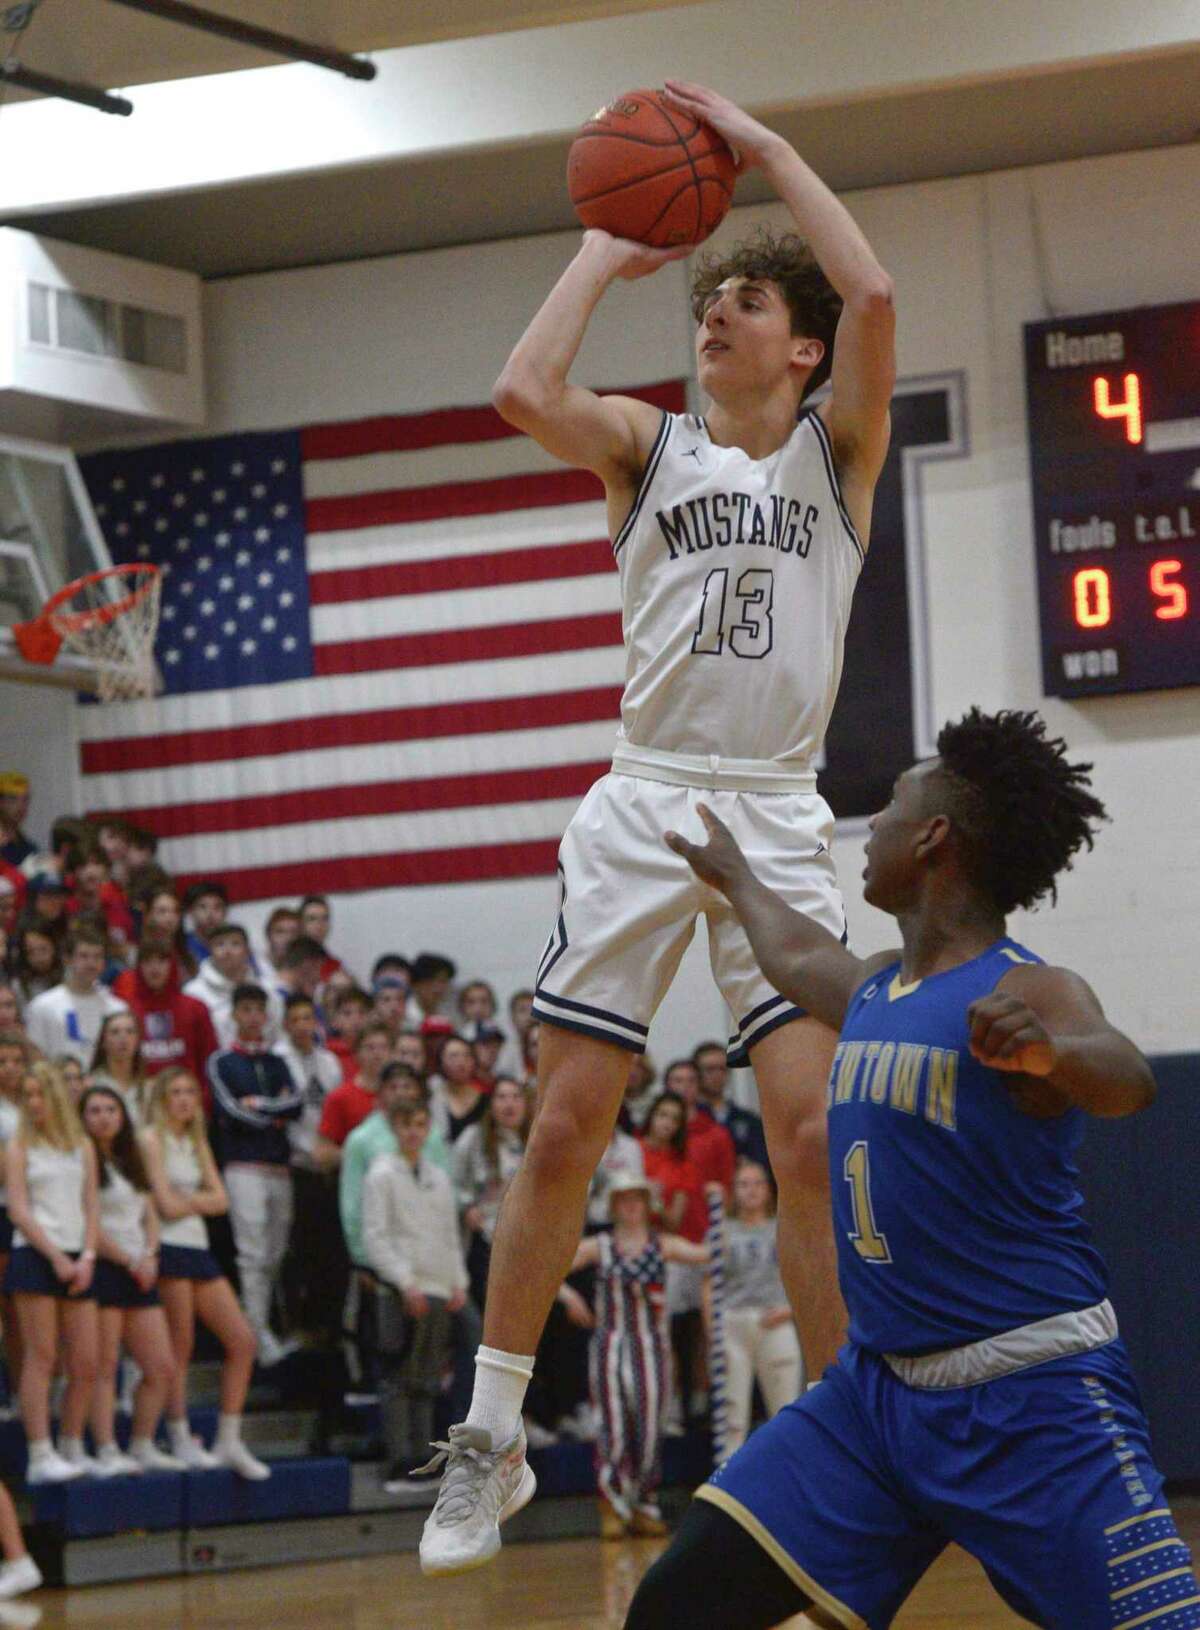 Immaculate's Sebastian Parenti (13) shoots over Newtown's Tyson Mobley (1) in the SWC boys basketball semifinal between No.4 Newtown and No.1 Immaculate, Tuesday night, March 3, 2020, at Immaculate High School, Danbury, Conn.